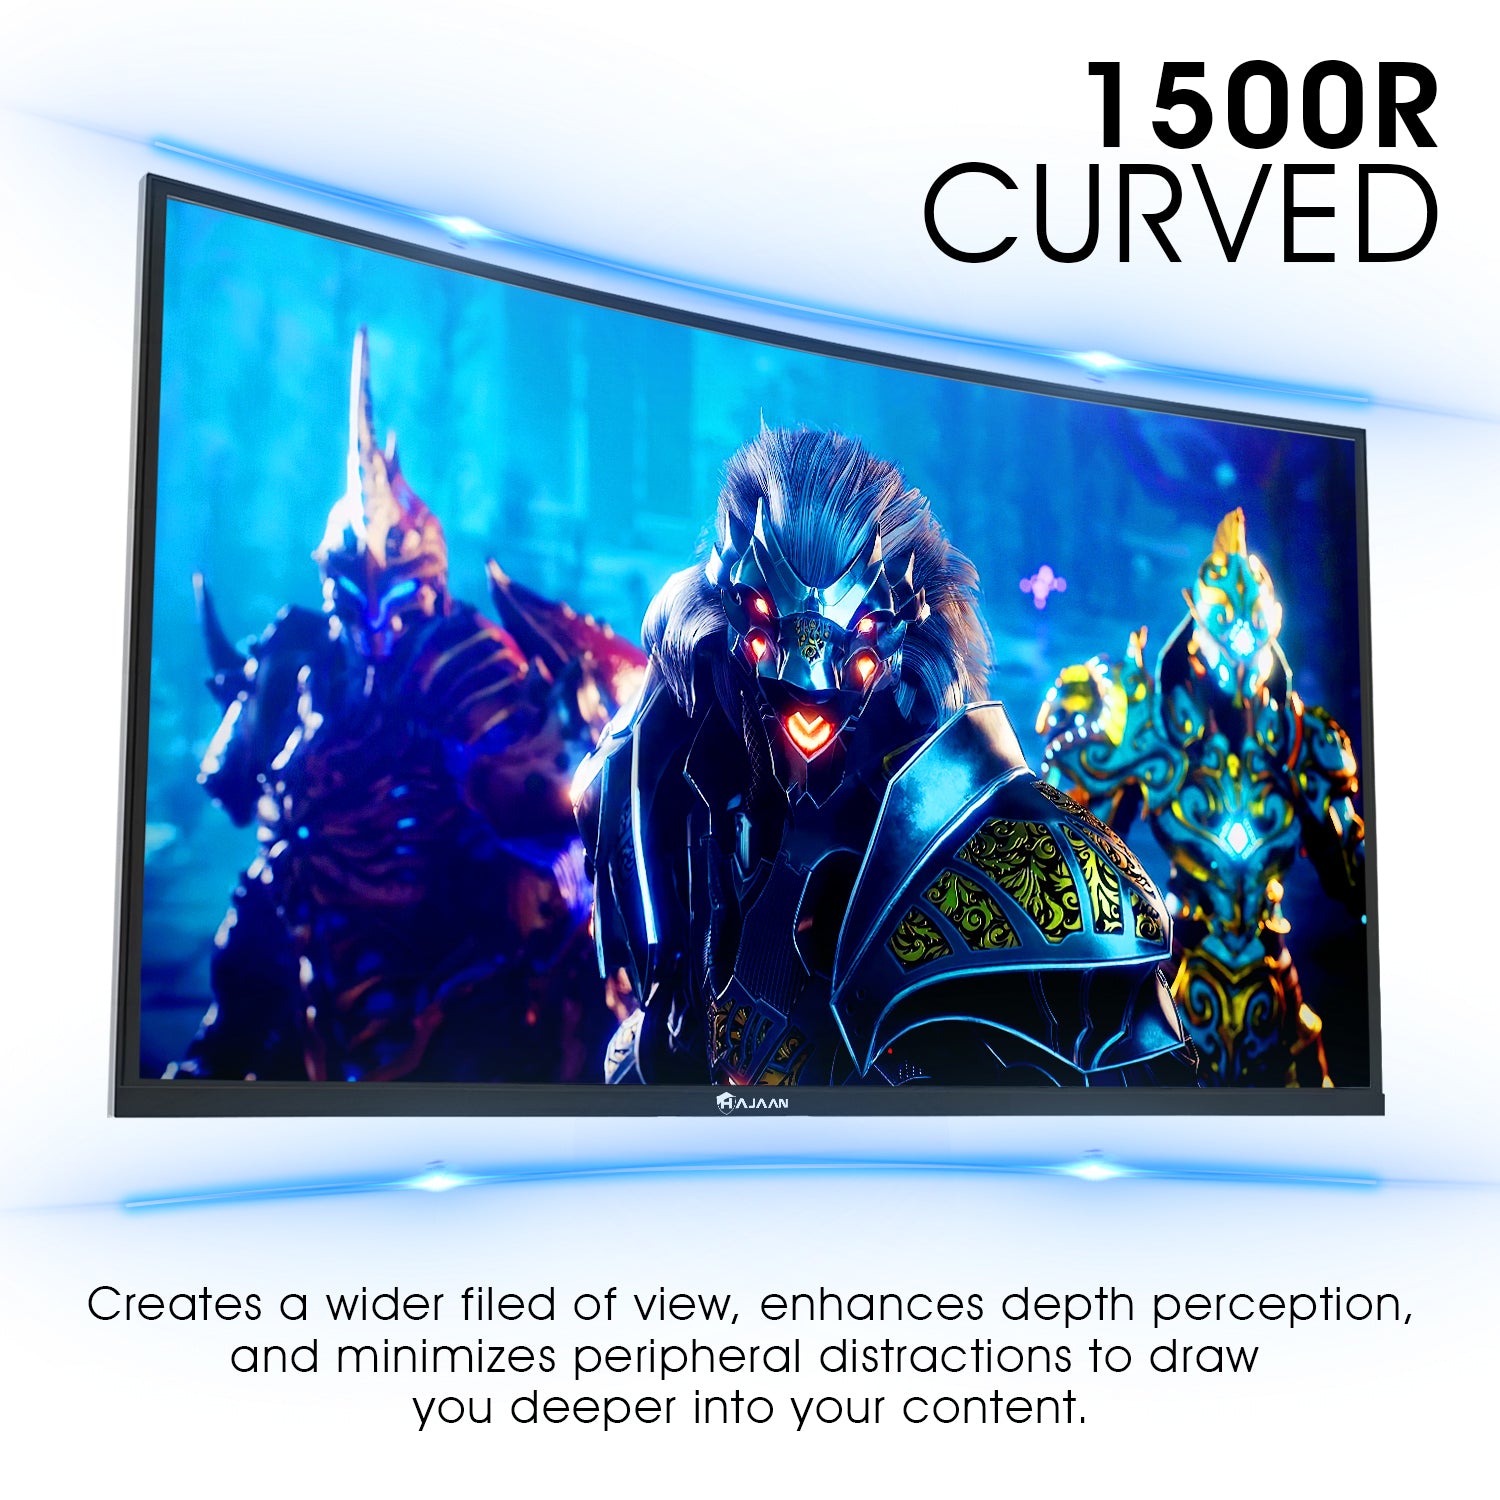 HAJAAN 32” Inch FHD 1080p Curved Gaming Monitor with RGB Lighting 200Hz Refresh Rate with VA Display, Built-in Speakers, Tilt Adjustment, Wall Mountable 2x HDMI, DP (X3223C) - Black